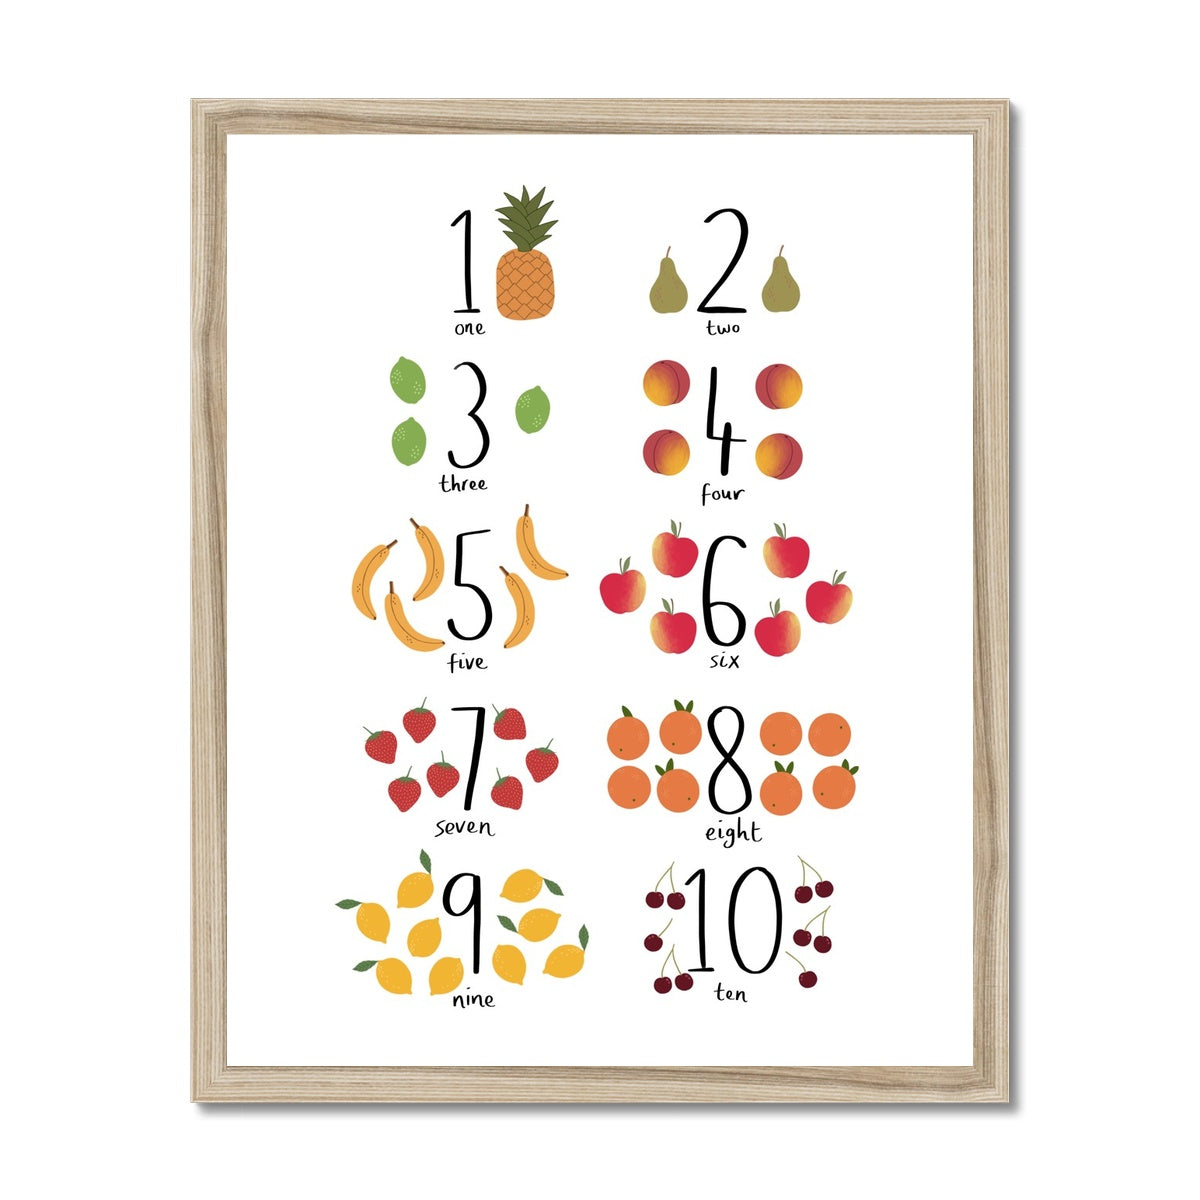 Counting fruit / Framed Print